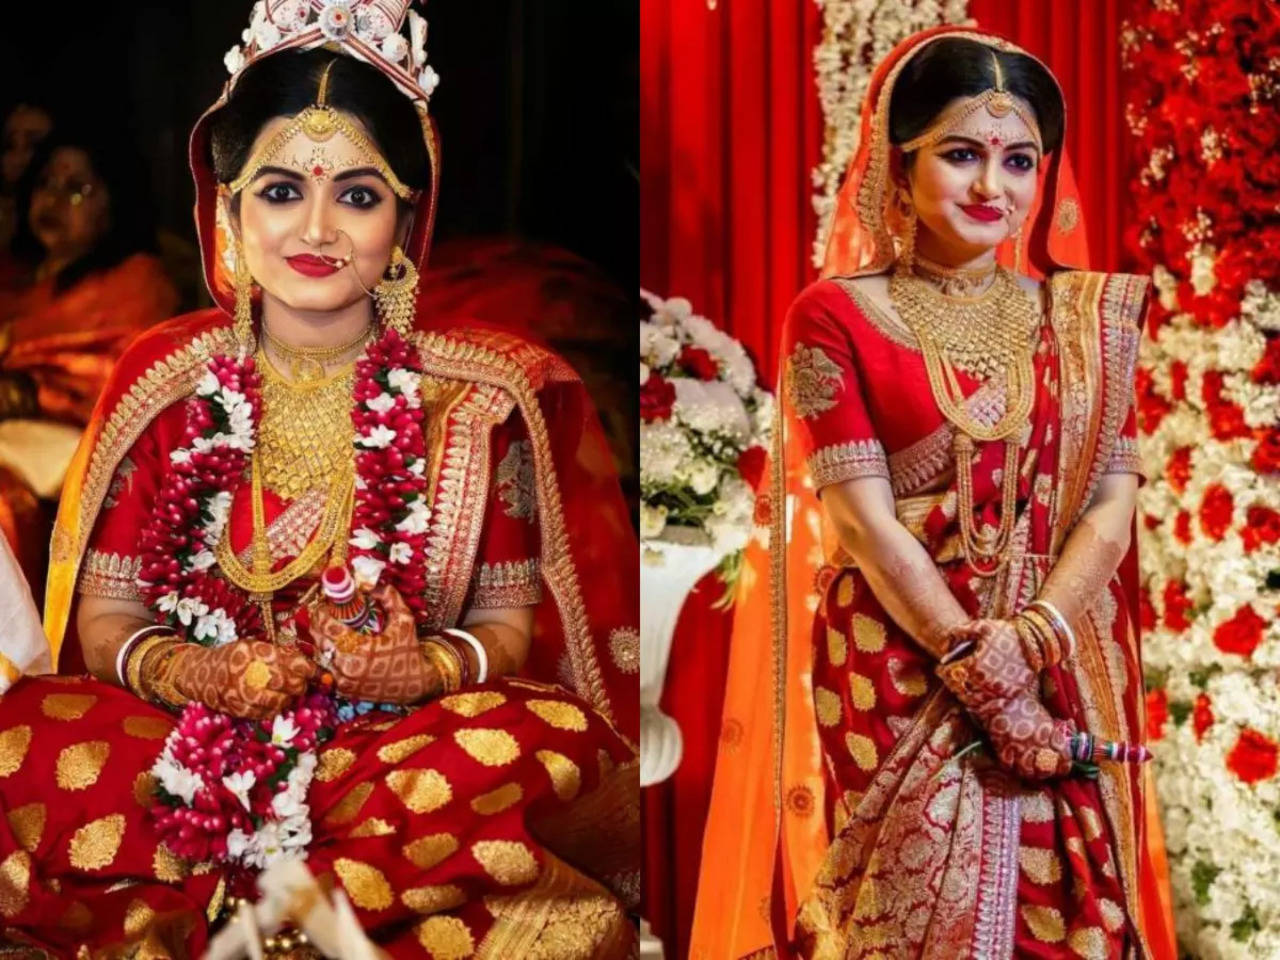 An Incredible Compilation of Over 999+ Stunning Bengali Bride Images in Full 4K